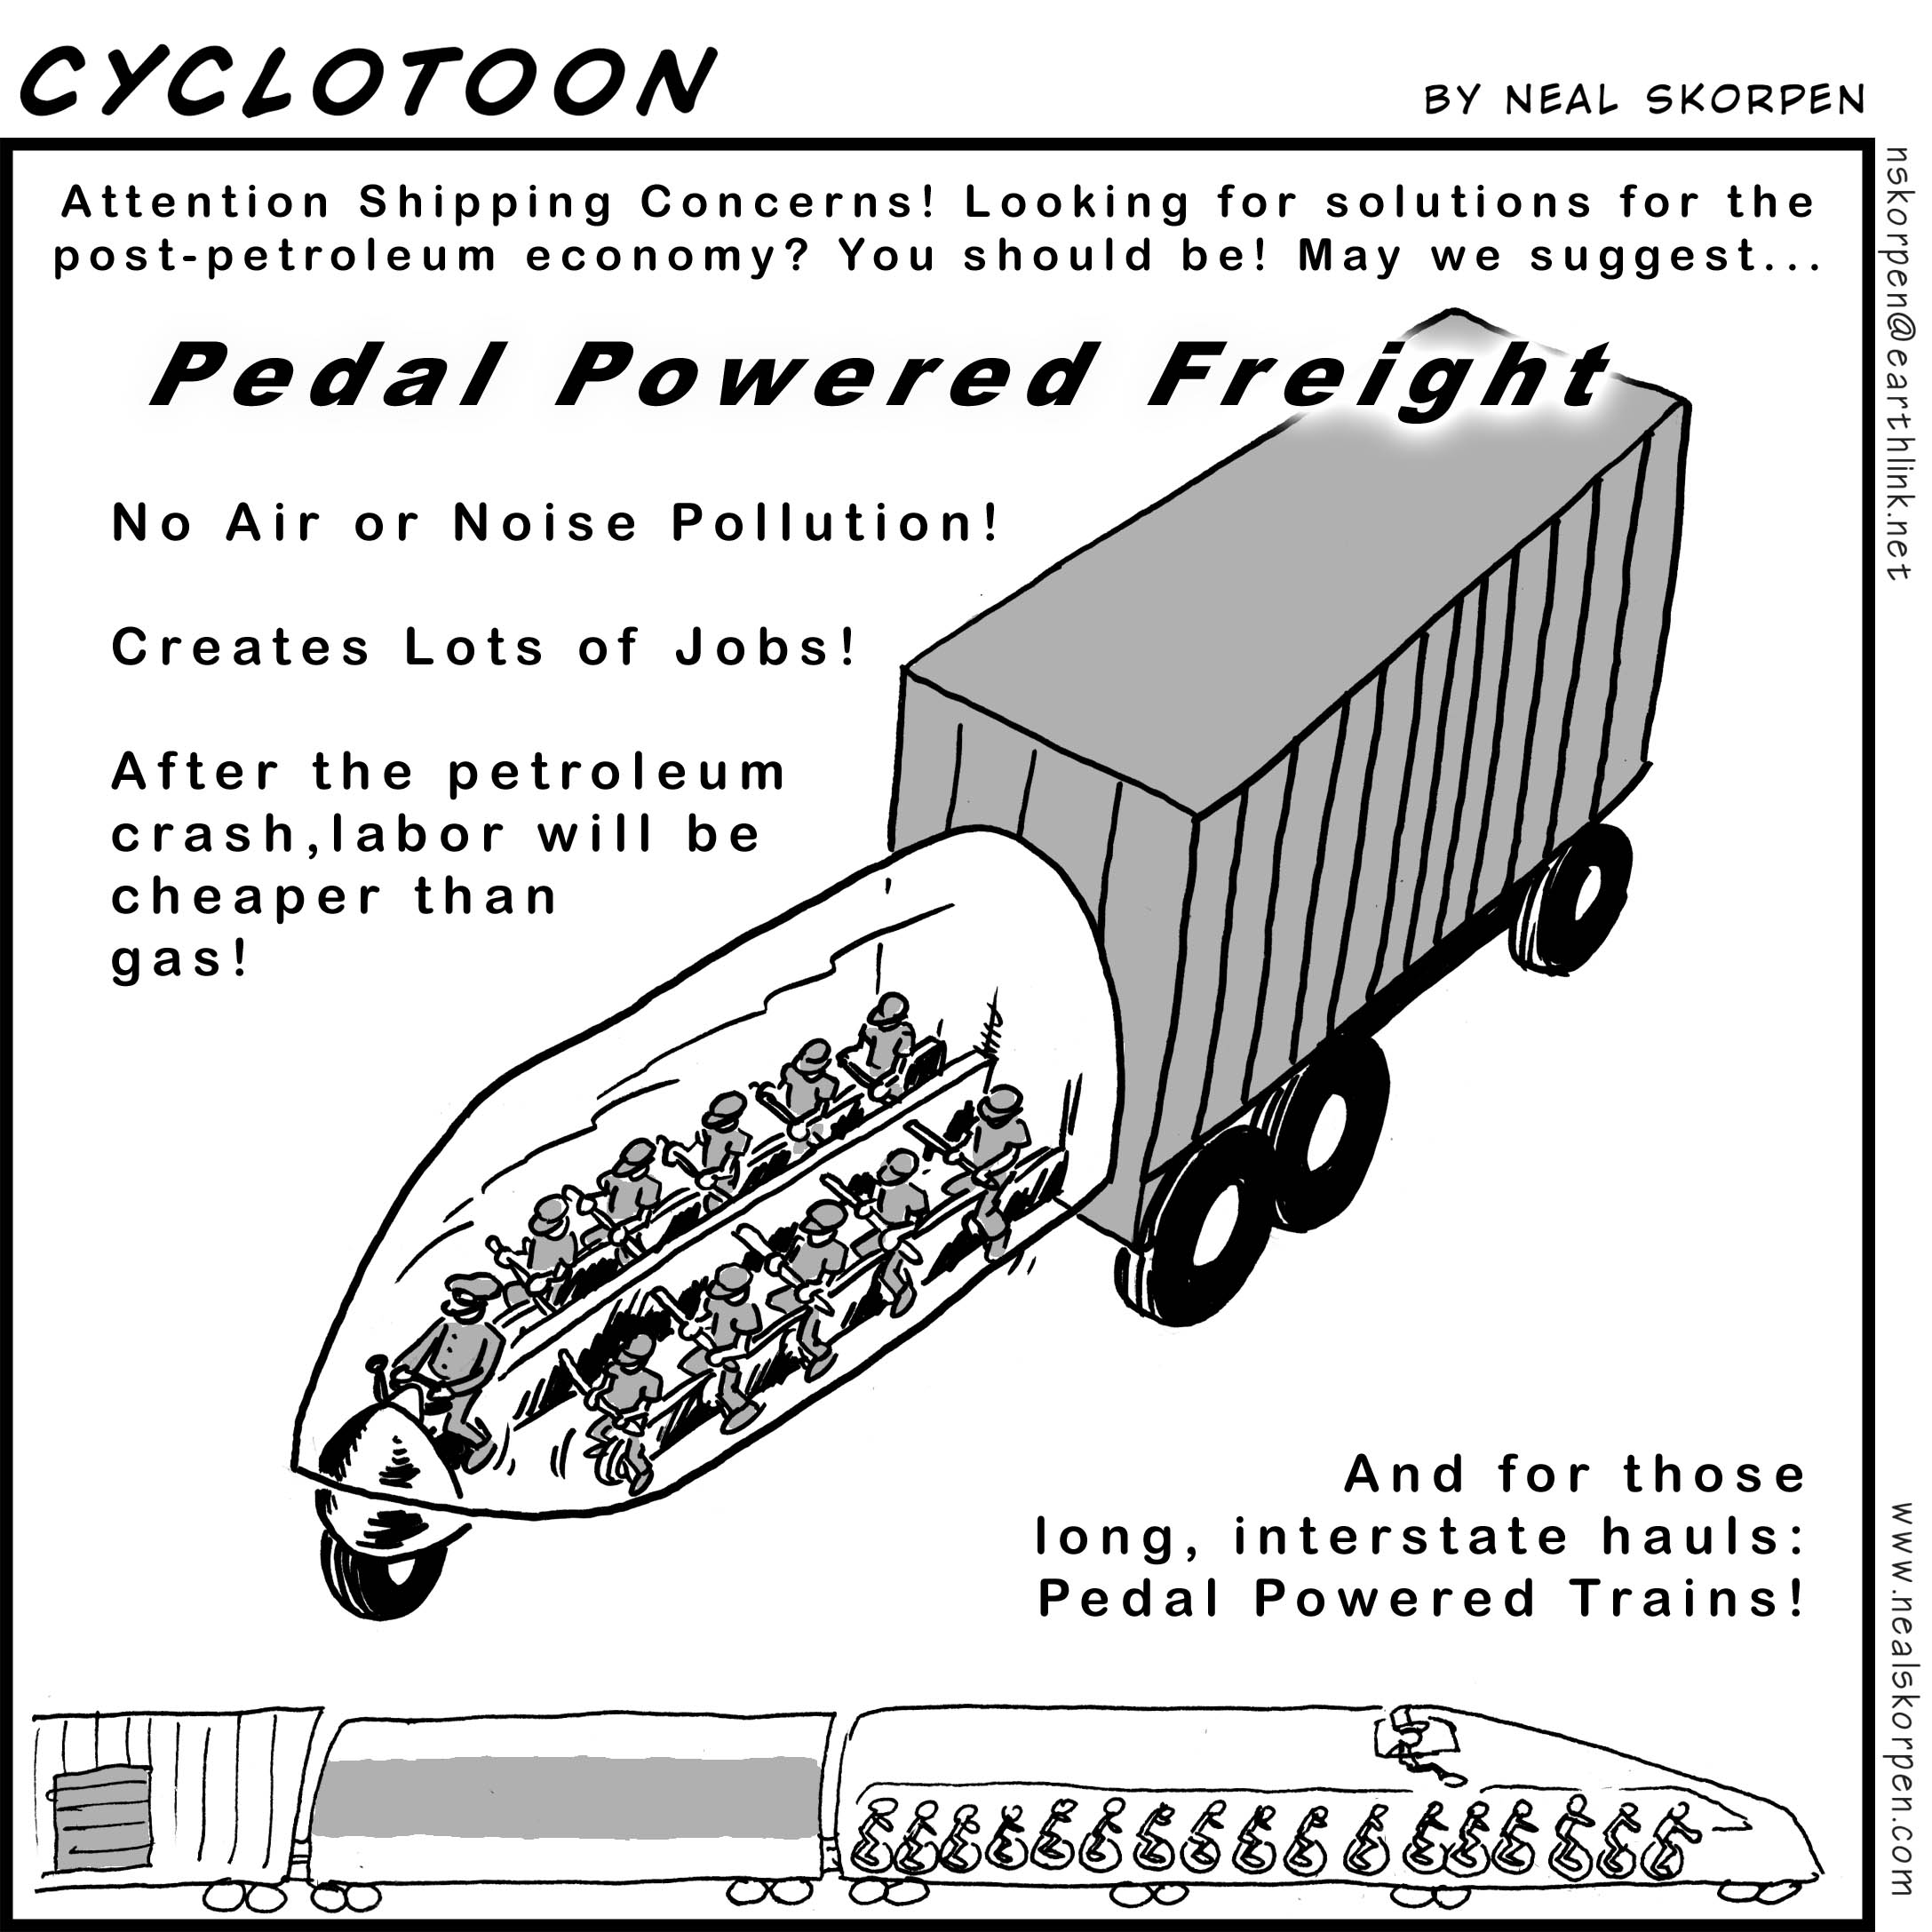 Cyclotoon: Freight, by Neal Skorpen